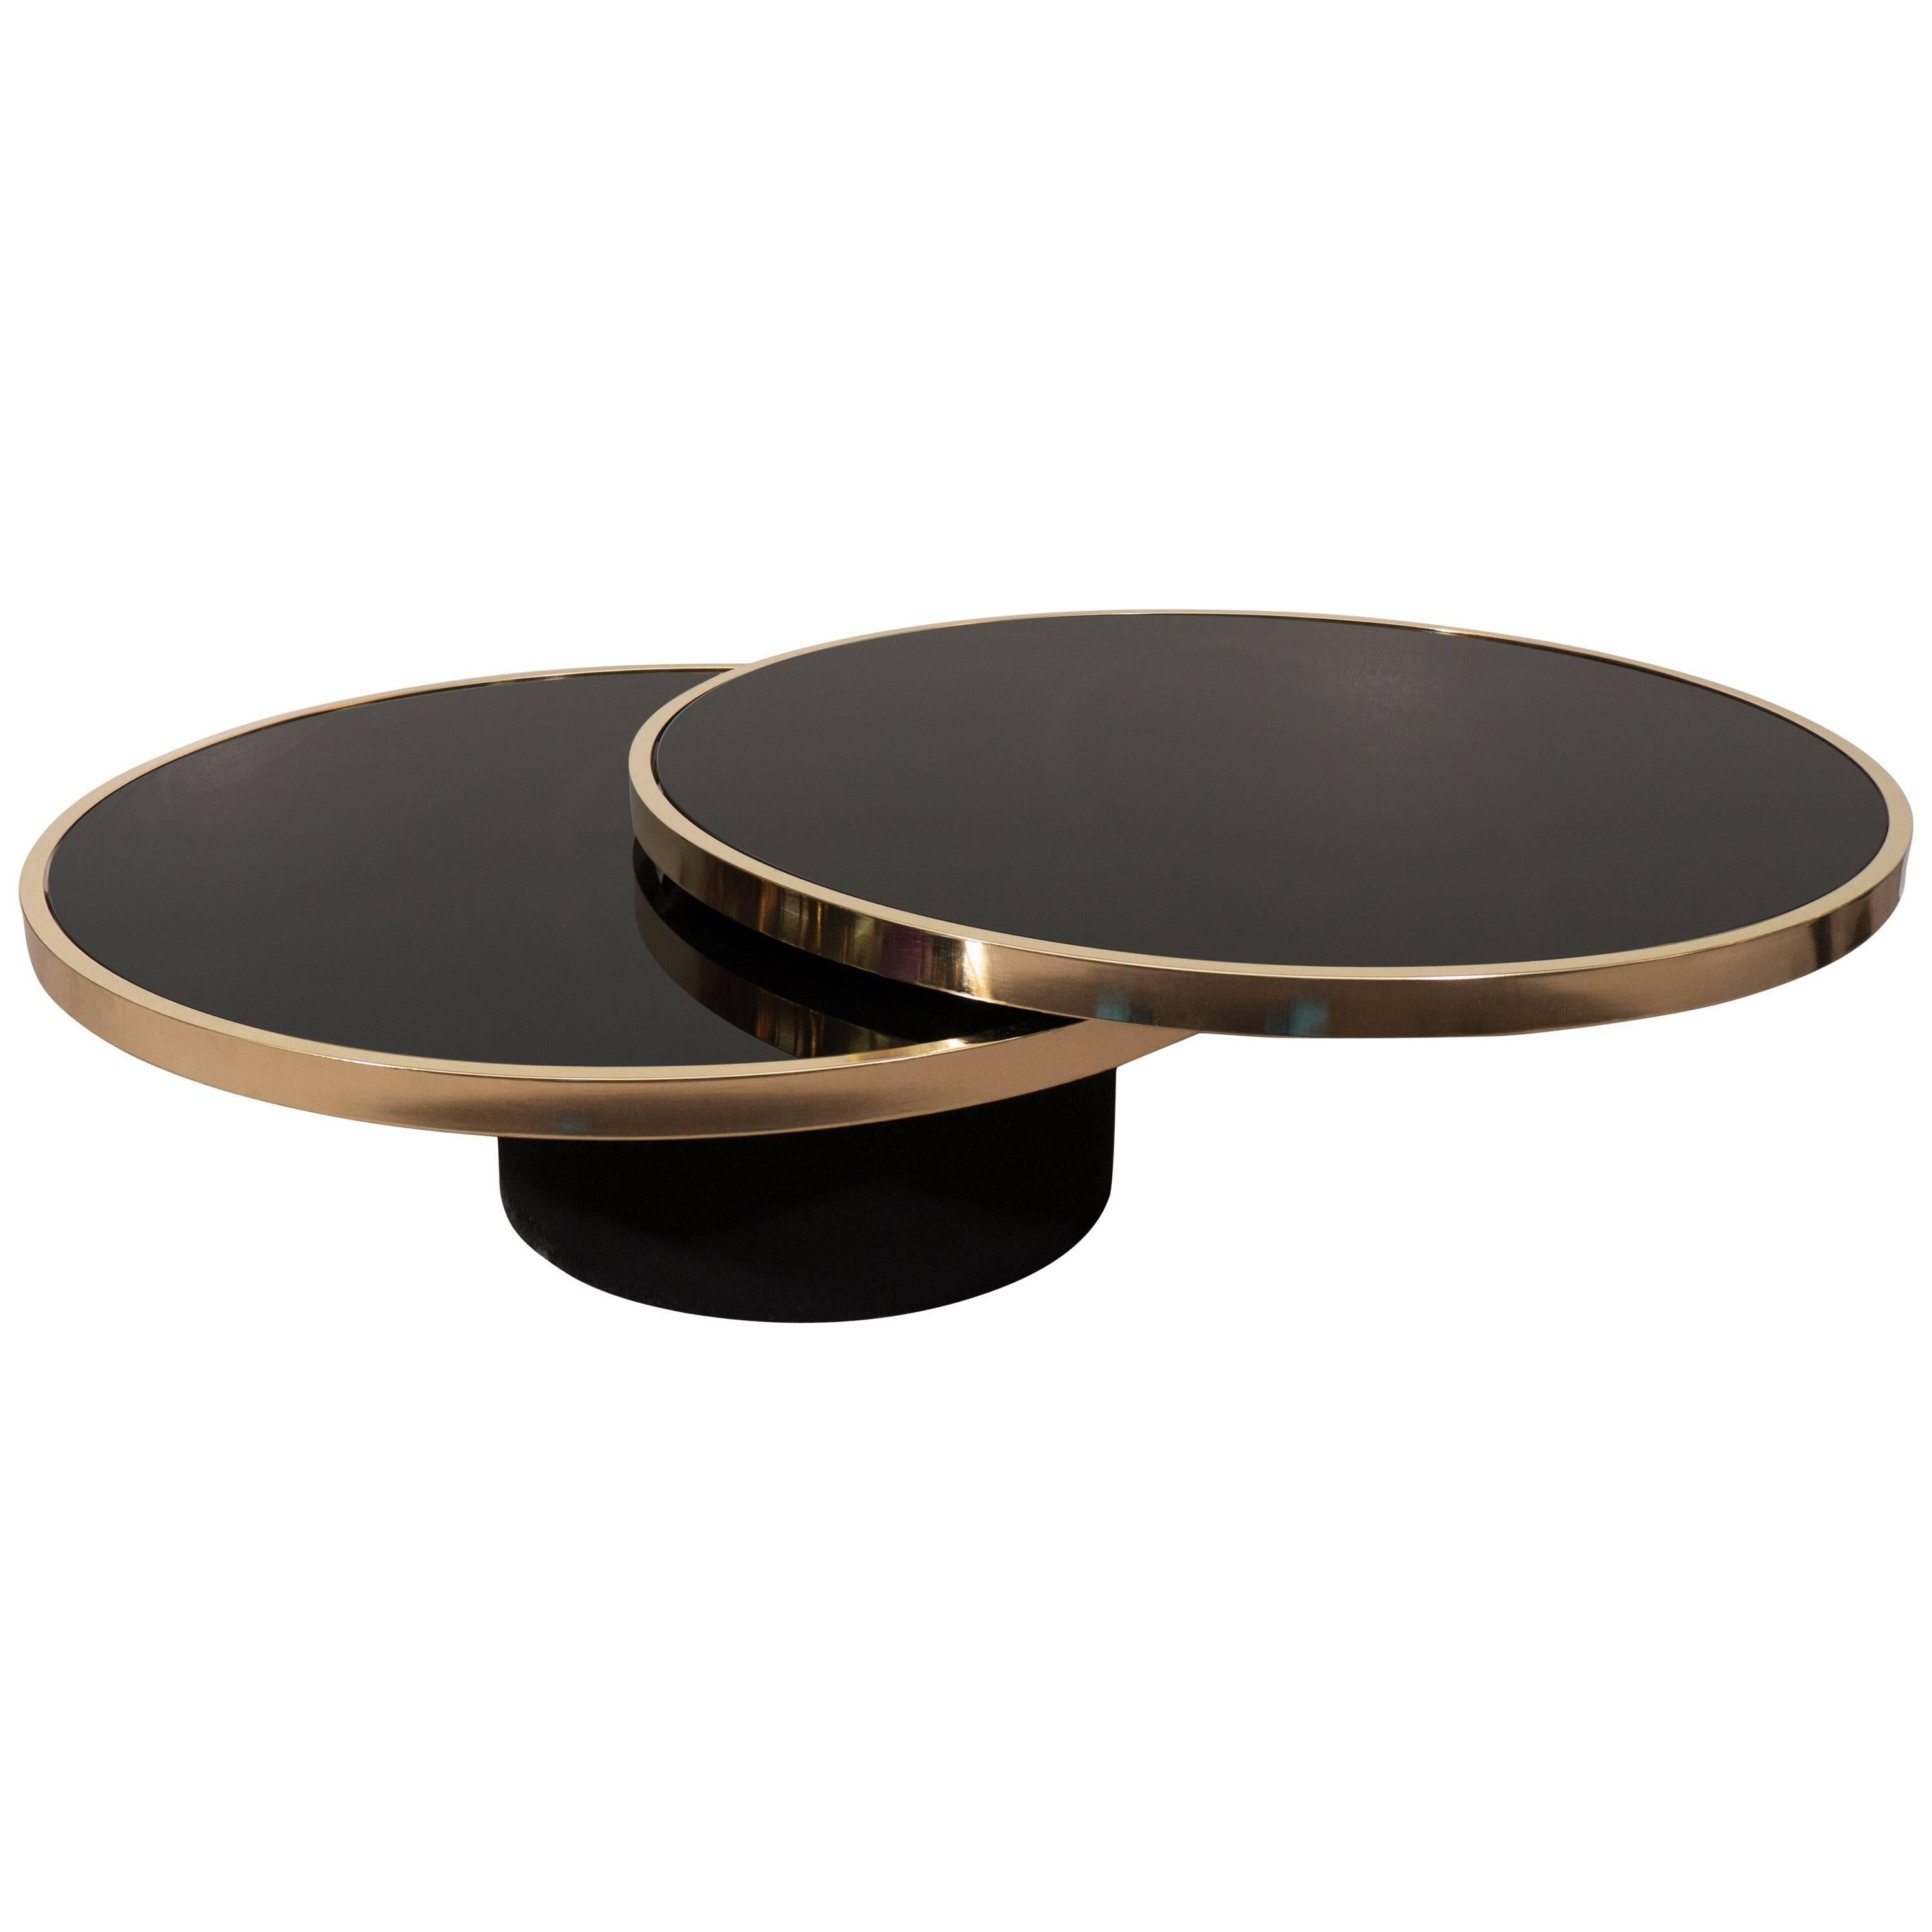 Black Glass and Brass Swivel Cocktail Table by the Design Institute of America